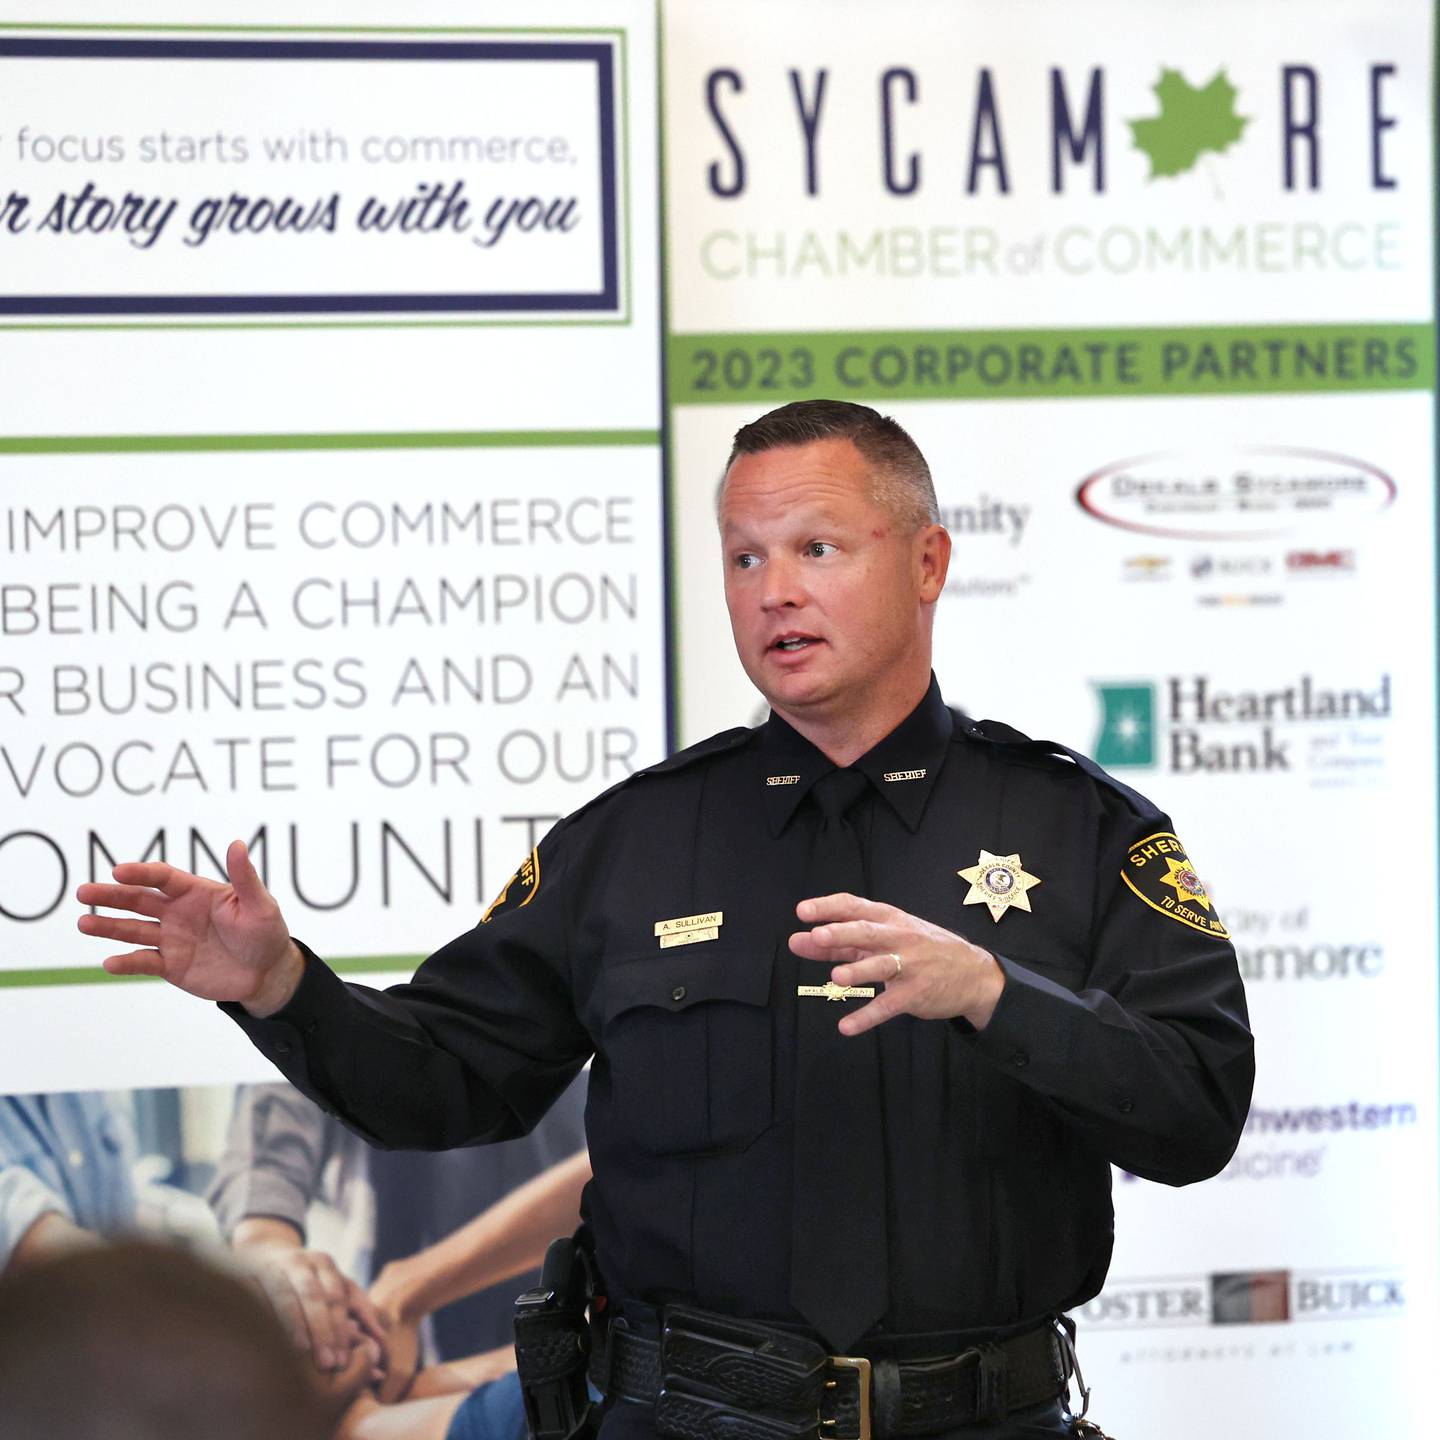 DeKalb County Sheriff Andy Sullivan speaks Wednesday, Sept. 13, 2023, during the Community Protection and Well-Being Forum: A Conversation about the Safe-T Act, in the DeKalb County Community Foundation Freight Room in Sycamore. The event was hosted by the Sycamore Chamber of Commerce.